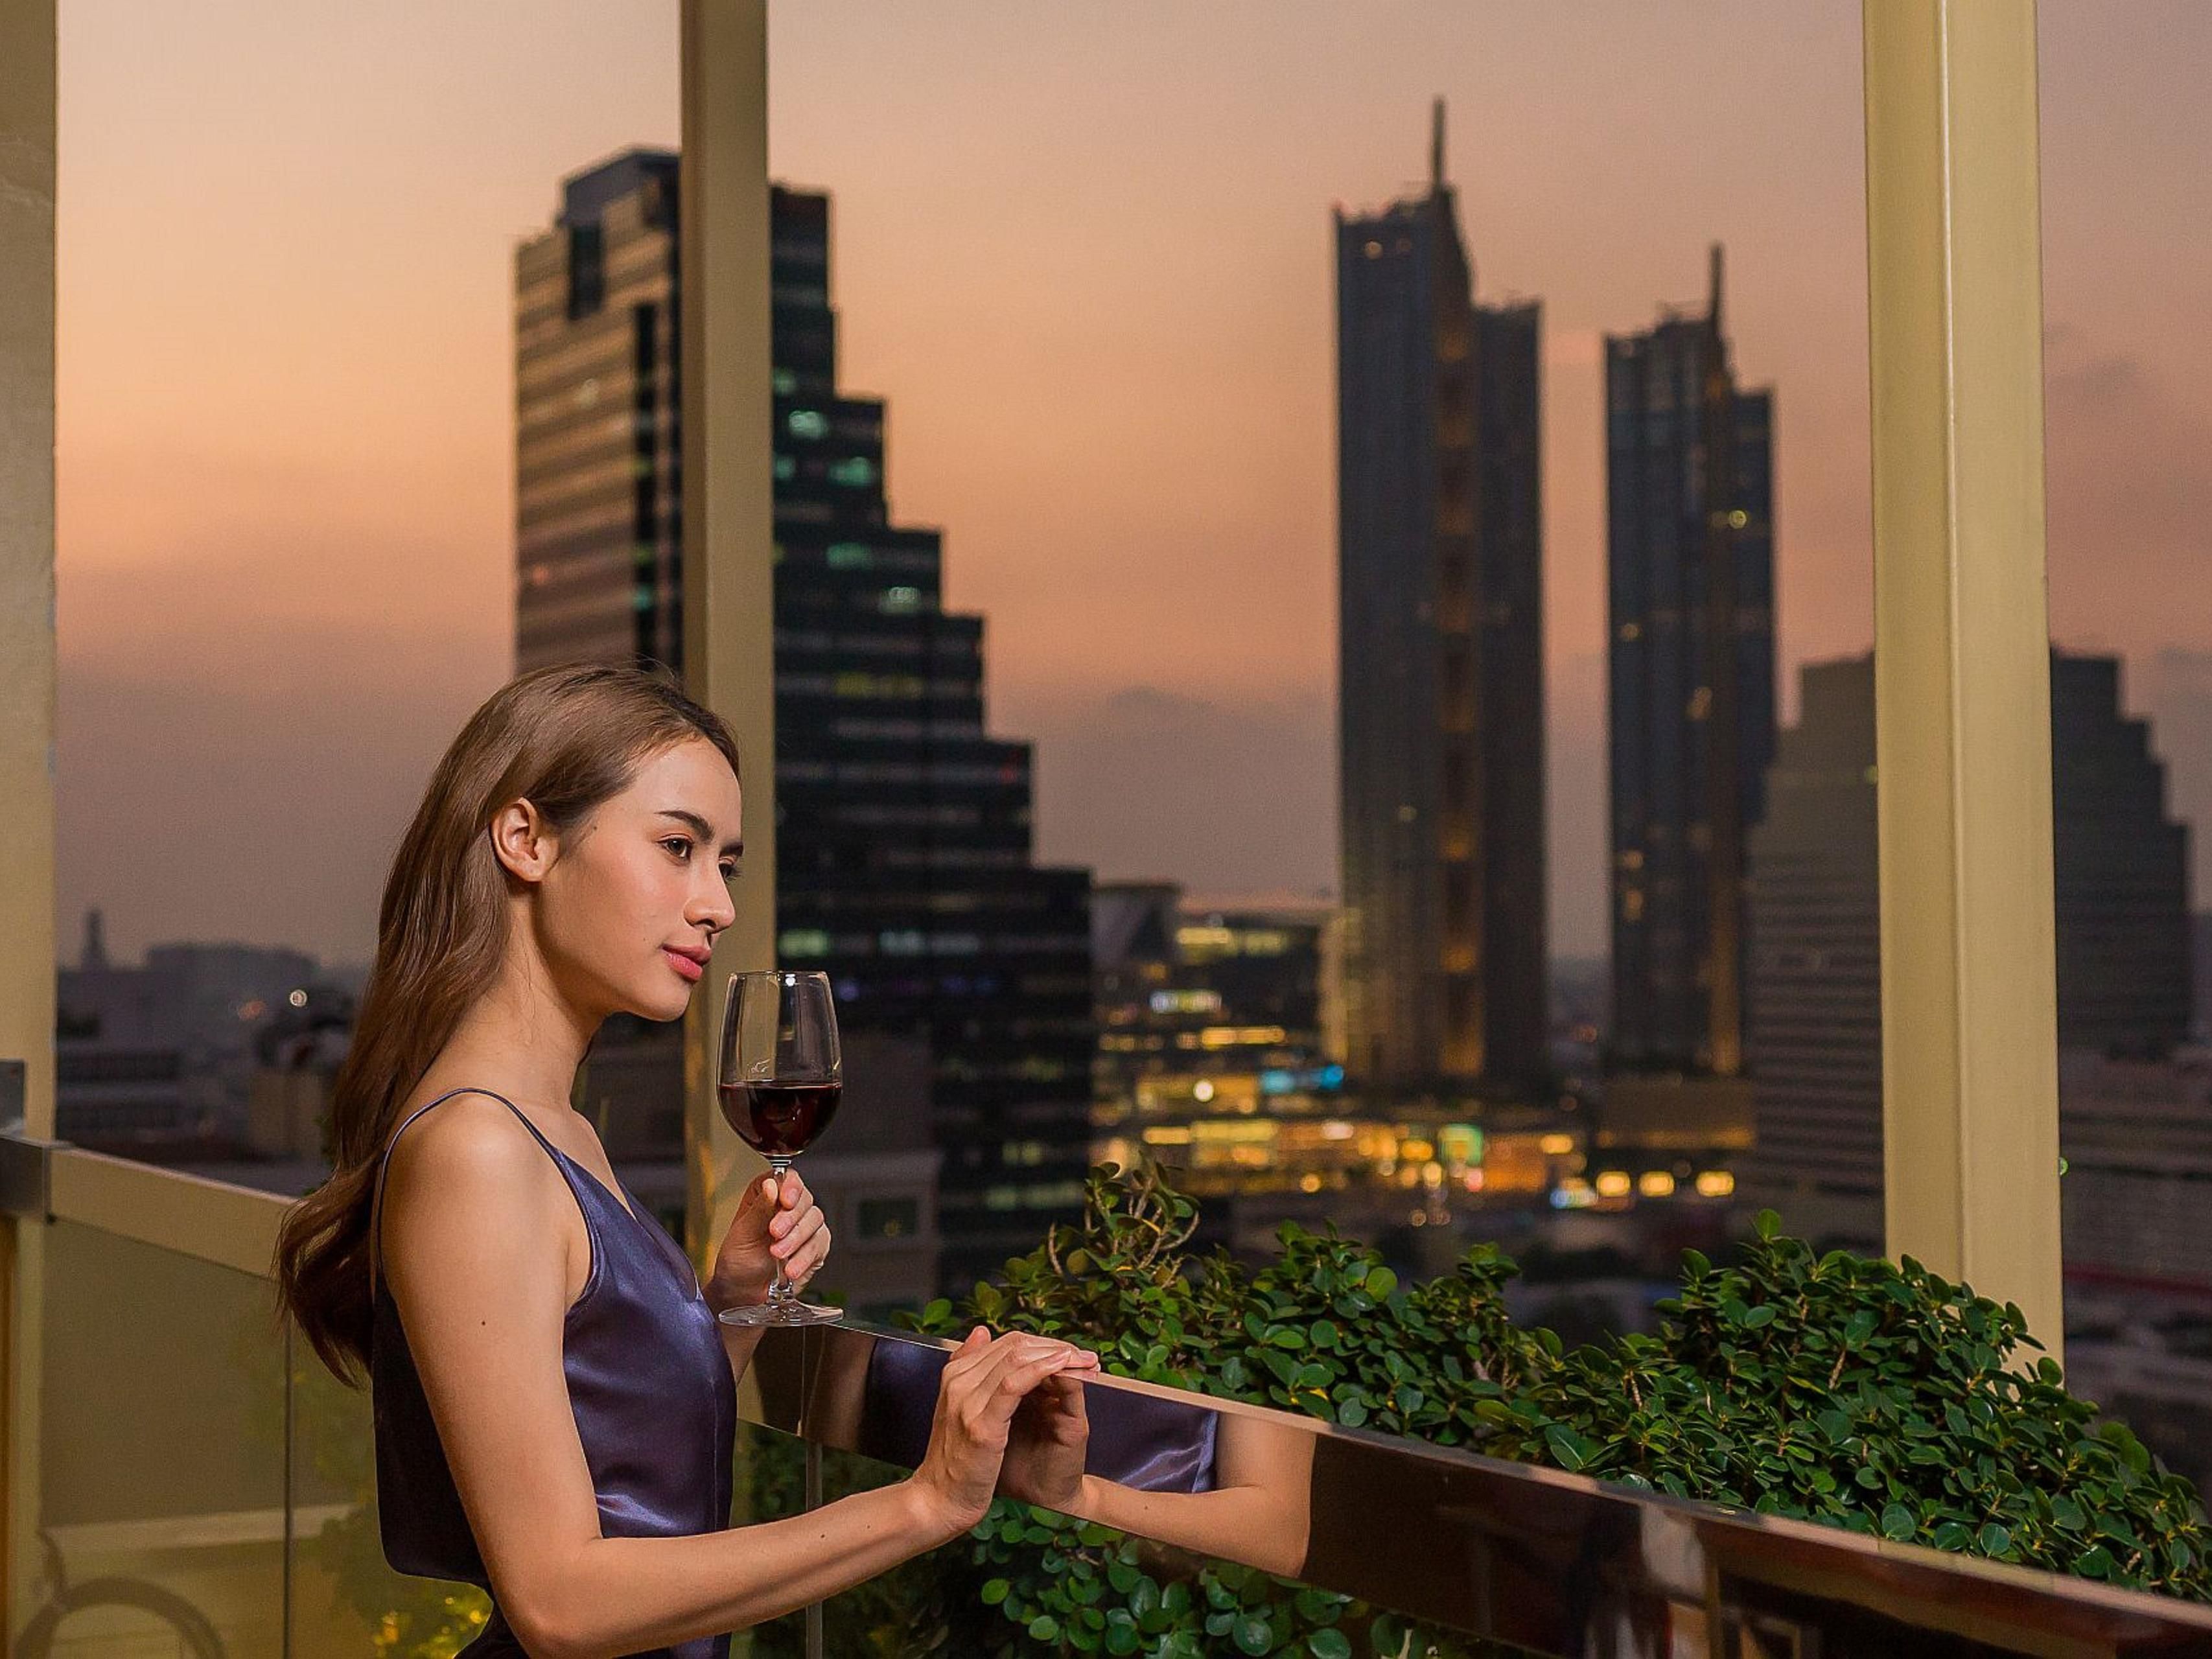 Enhance your Bangkok experience with privileged access to our Executive Club Lounge—a relaxed sanctuary with personalised service and upscale amenities. Open daily from 10:00 AM to 9:00 PM, unwind in style with complimentary snacks and refreshments. Enjoy the convivial atmosphere of our Social Hours from 6:00 PM – 8:00 PM.